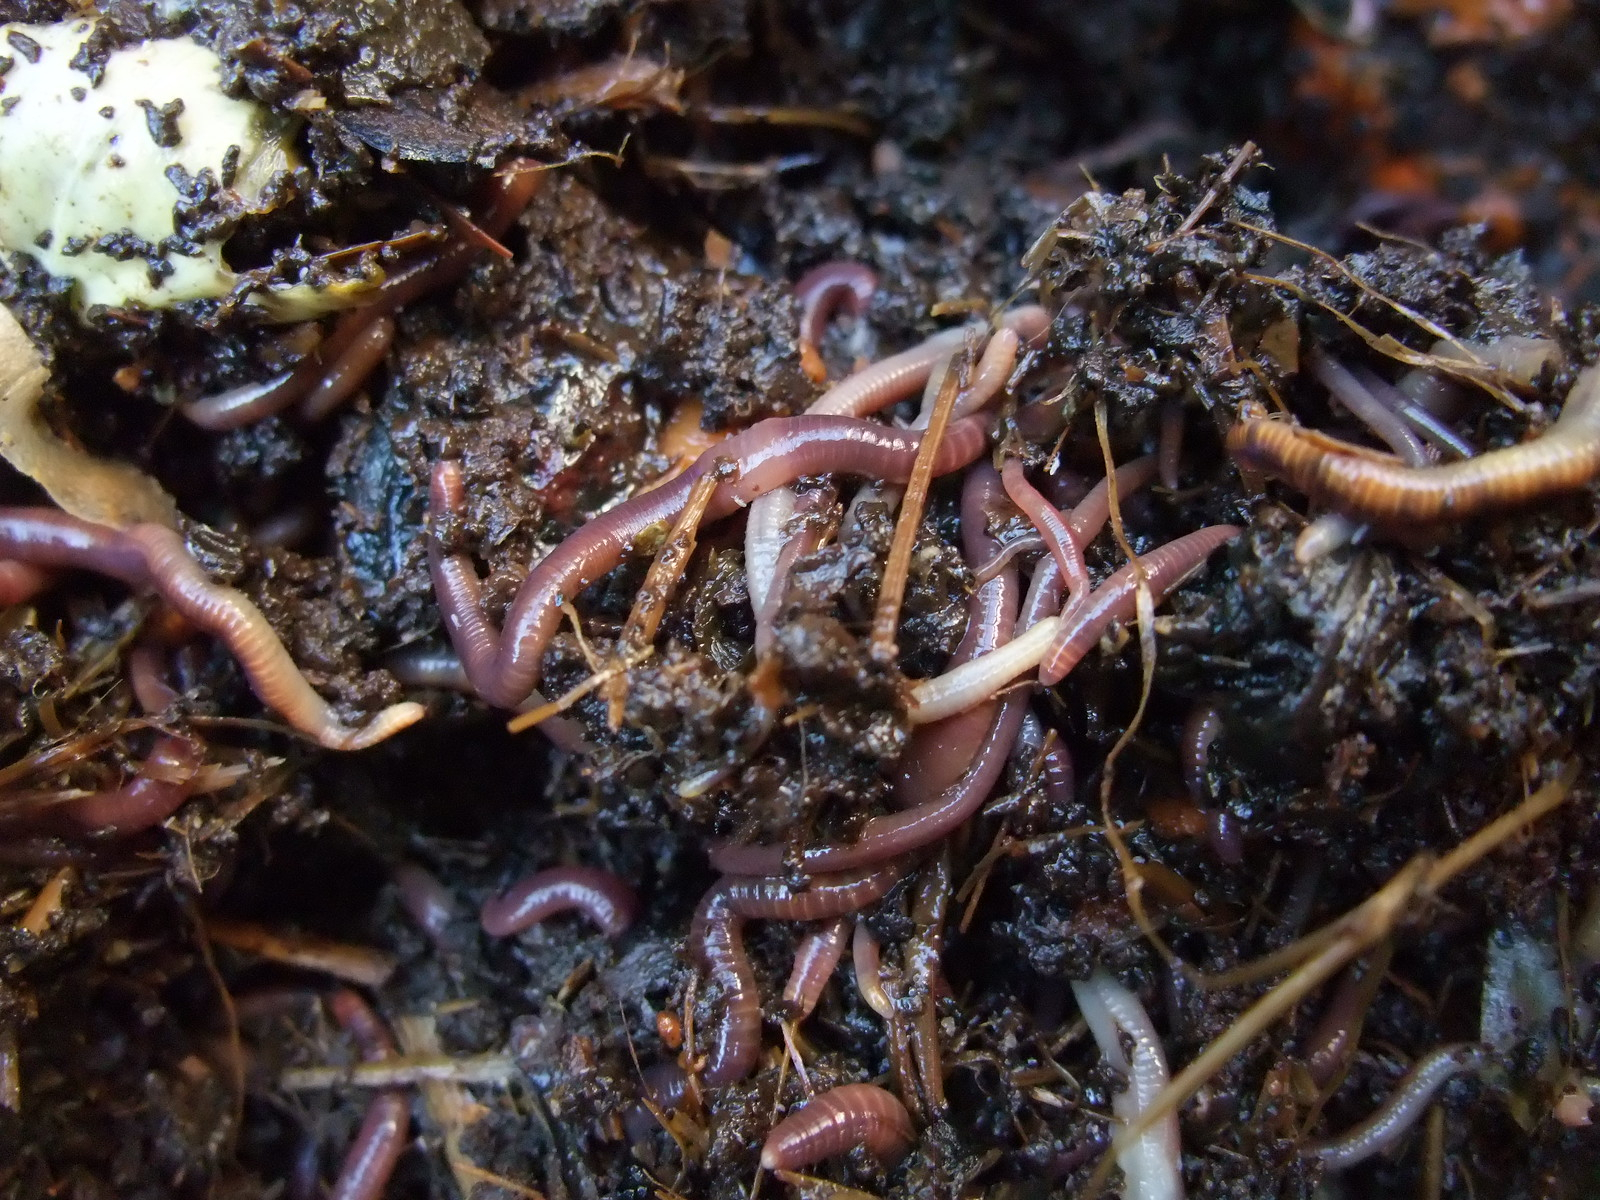 Earthworms help produce as much grain as Russia